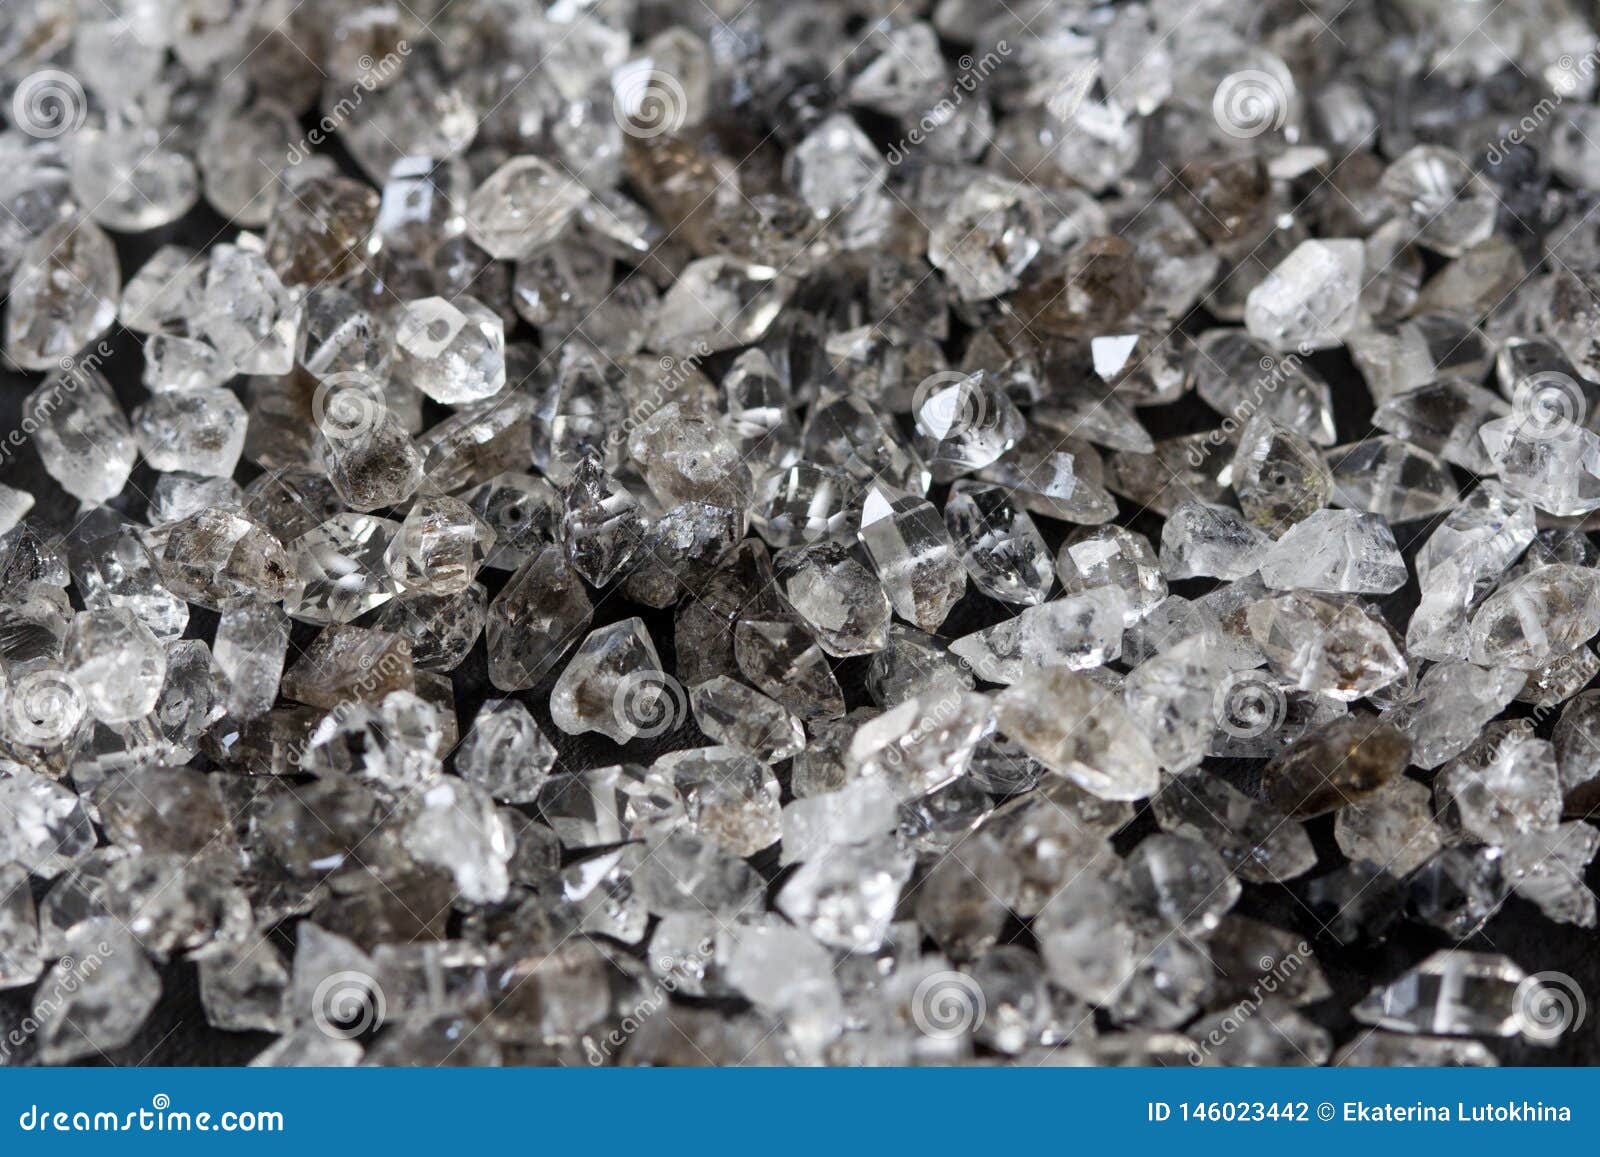 Scattered Diamonds on a Black Background. Raw Diamonds and Mining ...